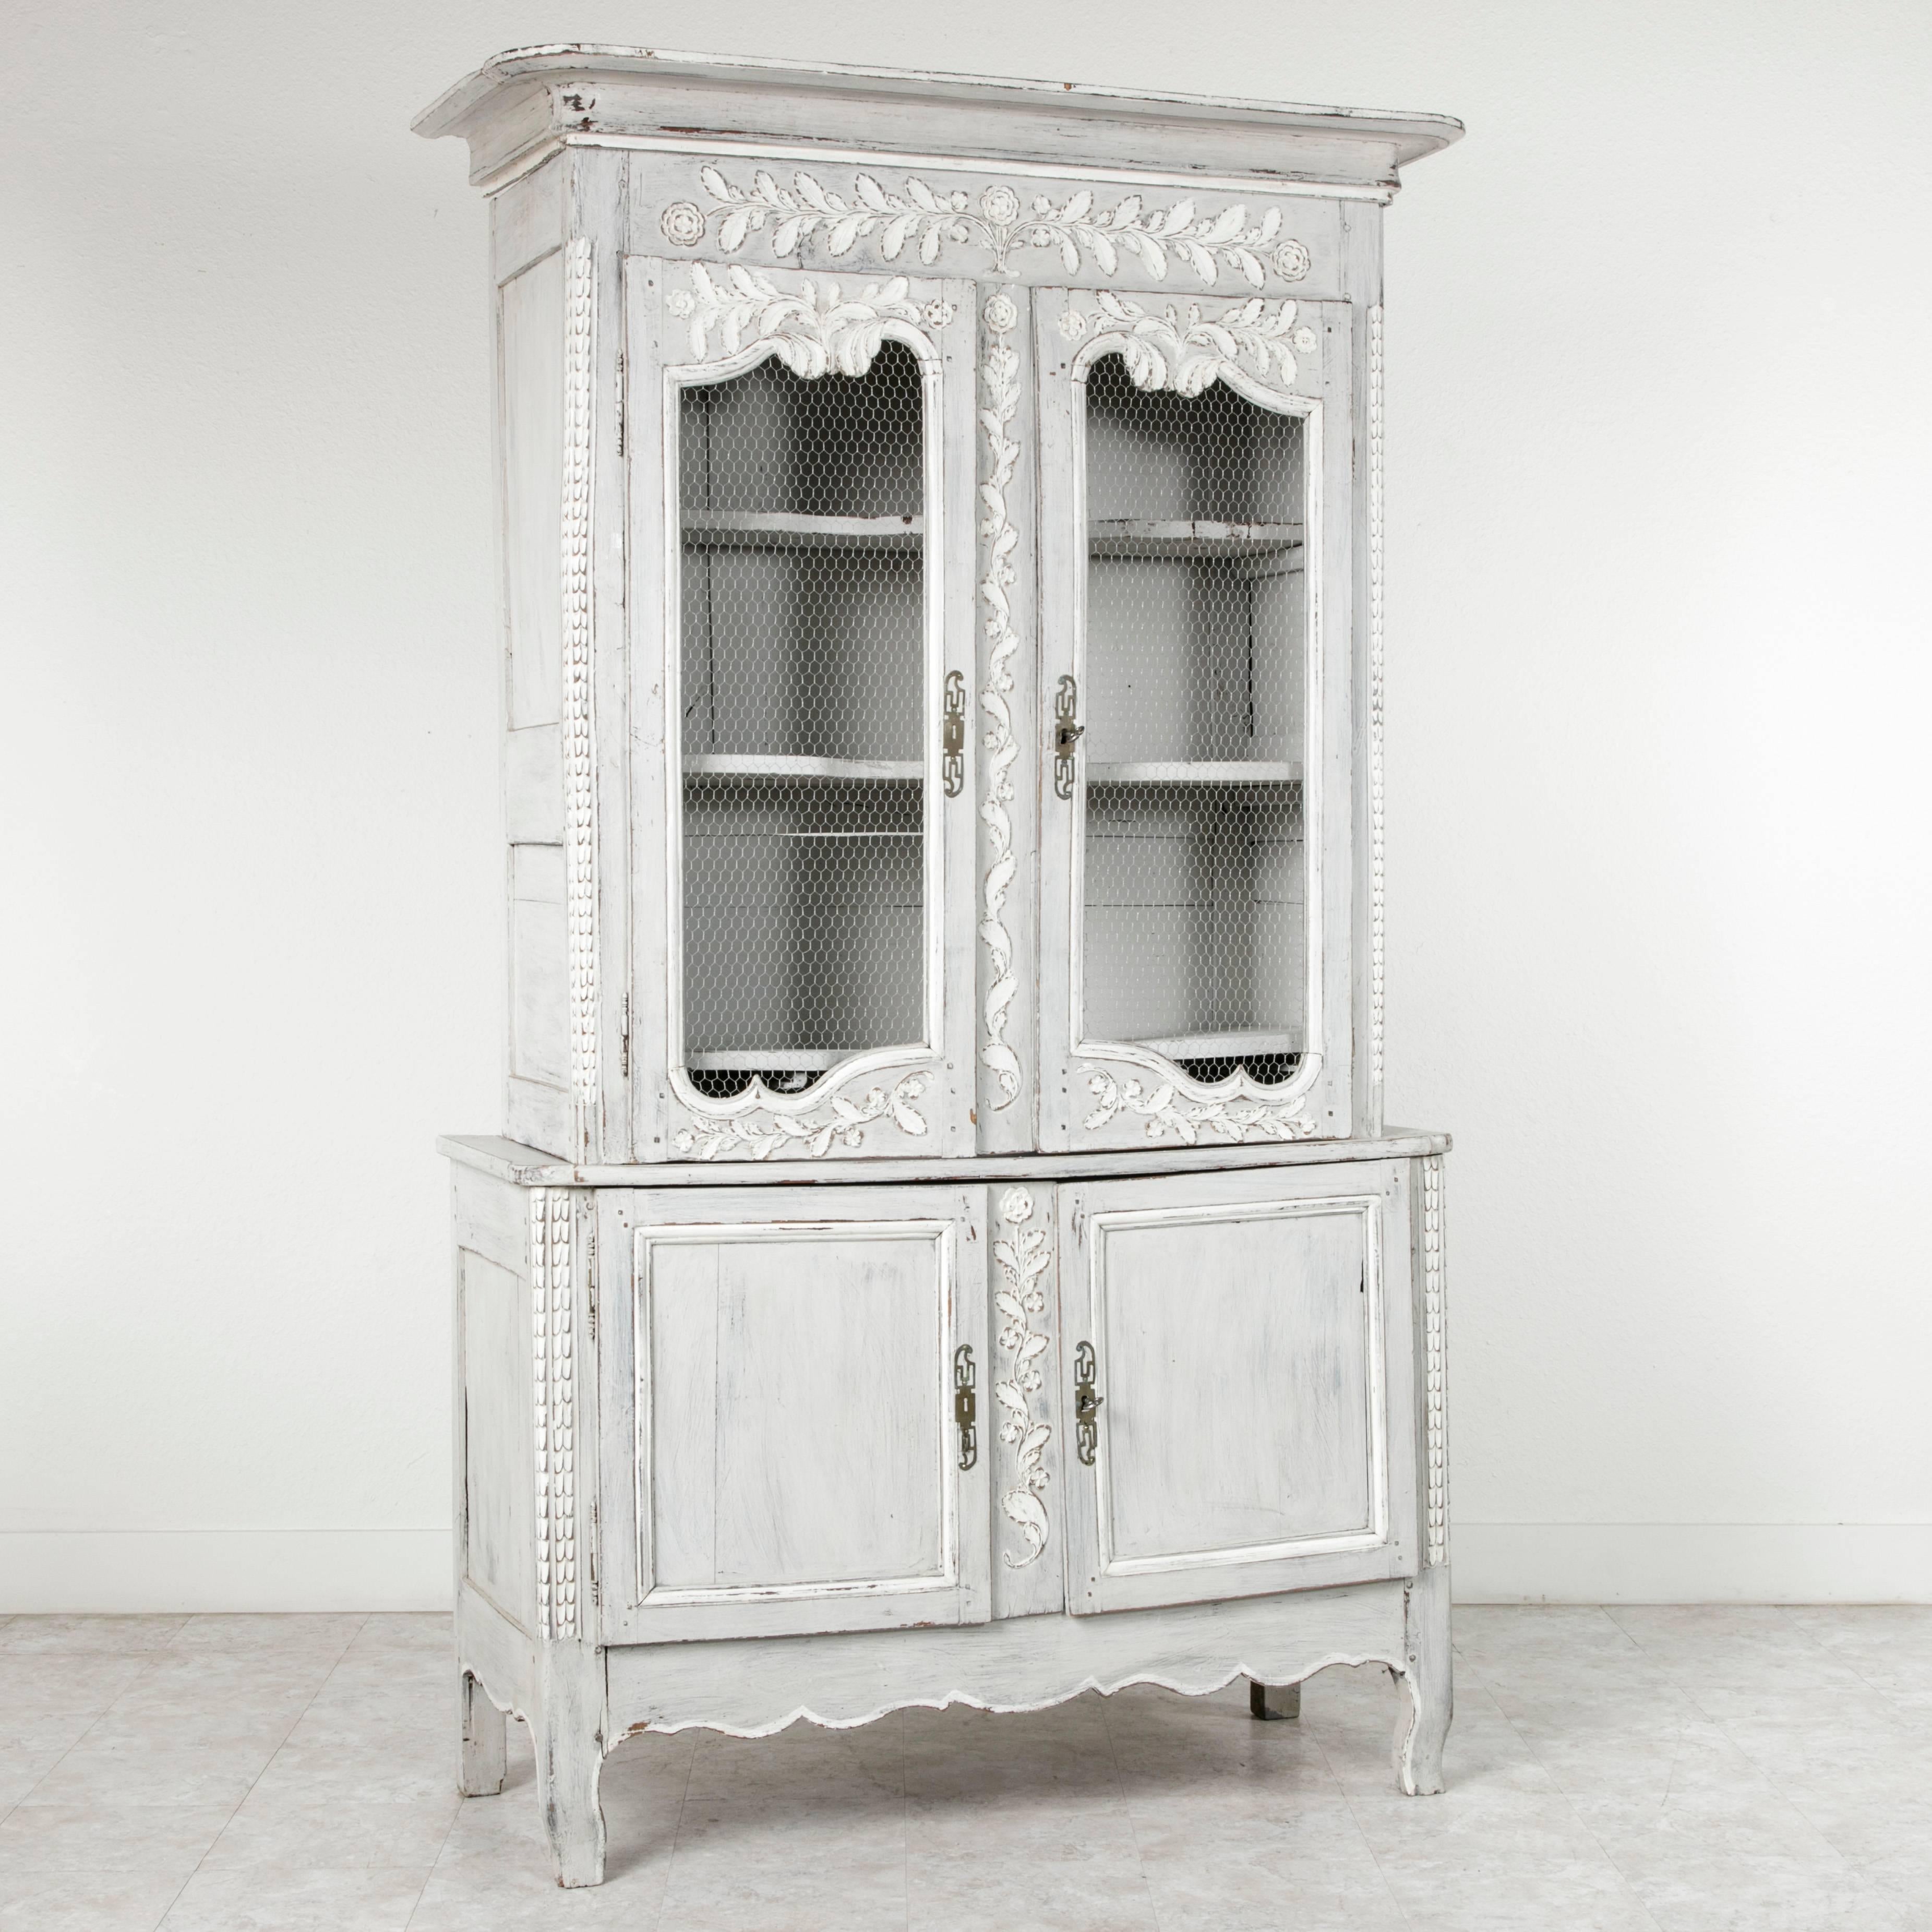 This turn of the century Louis XVI style buffet deux corps is painted in a light hue of blue grey, referred to as Marie Antoinette grey. Its lavish hand carvings of leaves and flowers at the crown and around the upper doors are enhanced by its